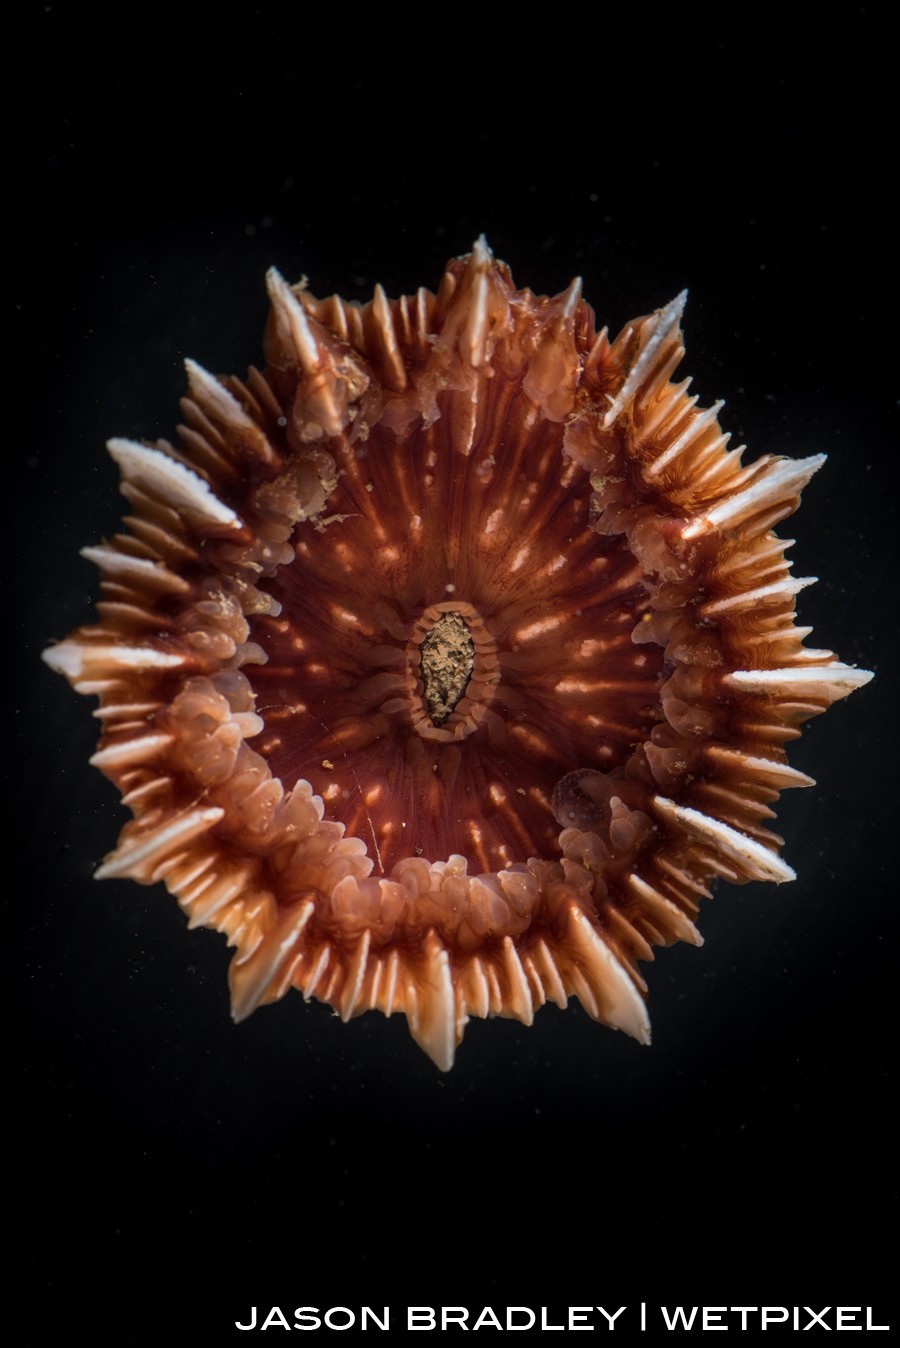 A stony coral (*Scleractinia*) recovered from 2000 meters below.